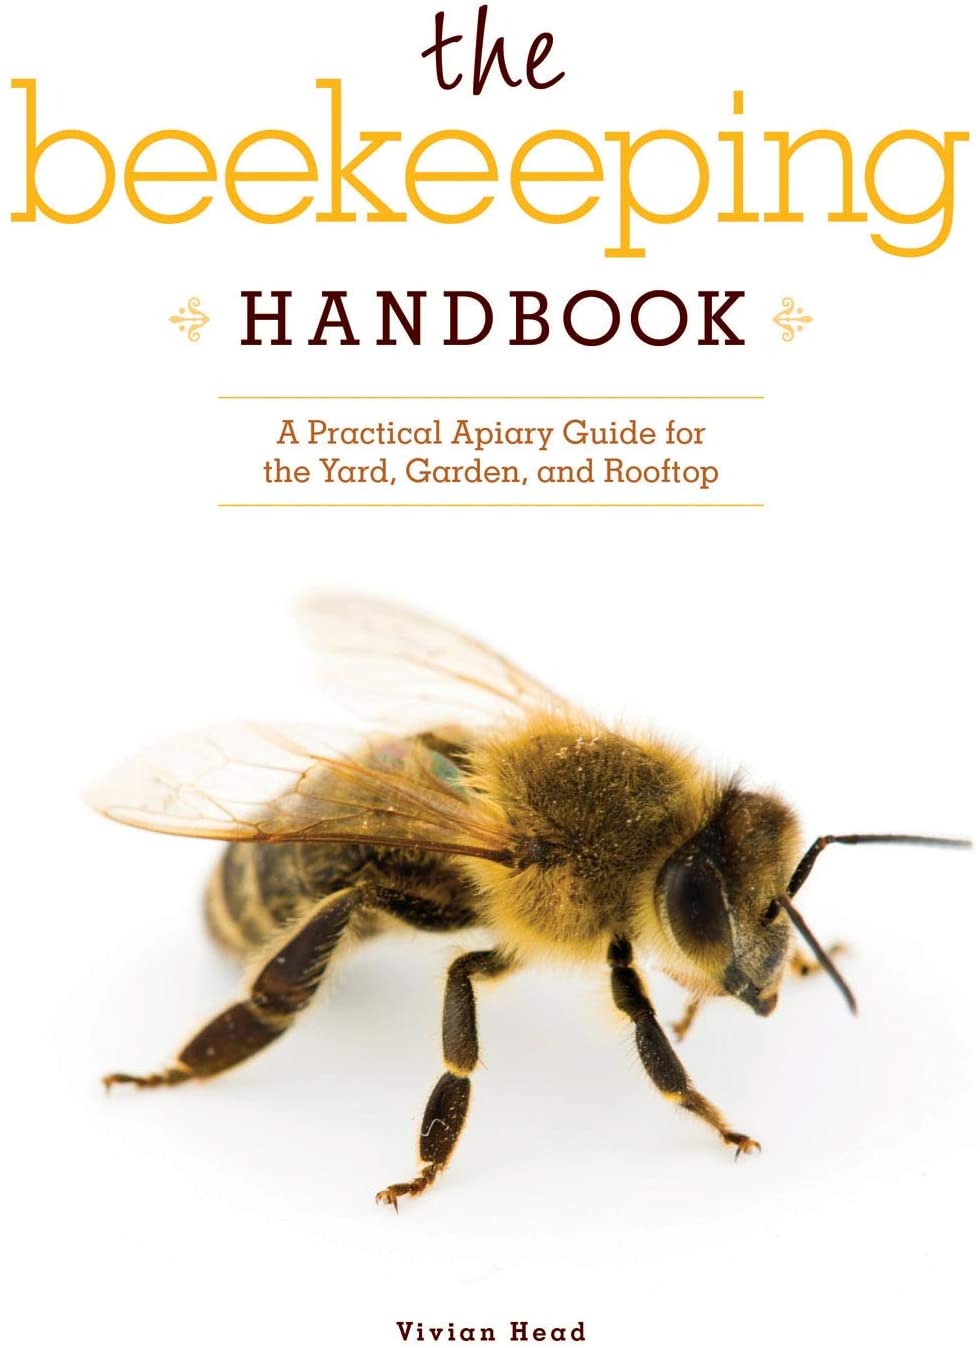 Beekeeping Handbook, The: A Practical Apiary Guide for the Yard, Garden, and Rooftop